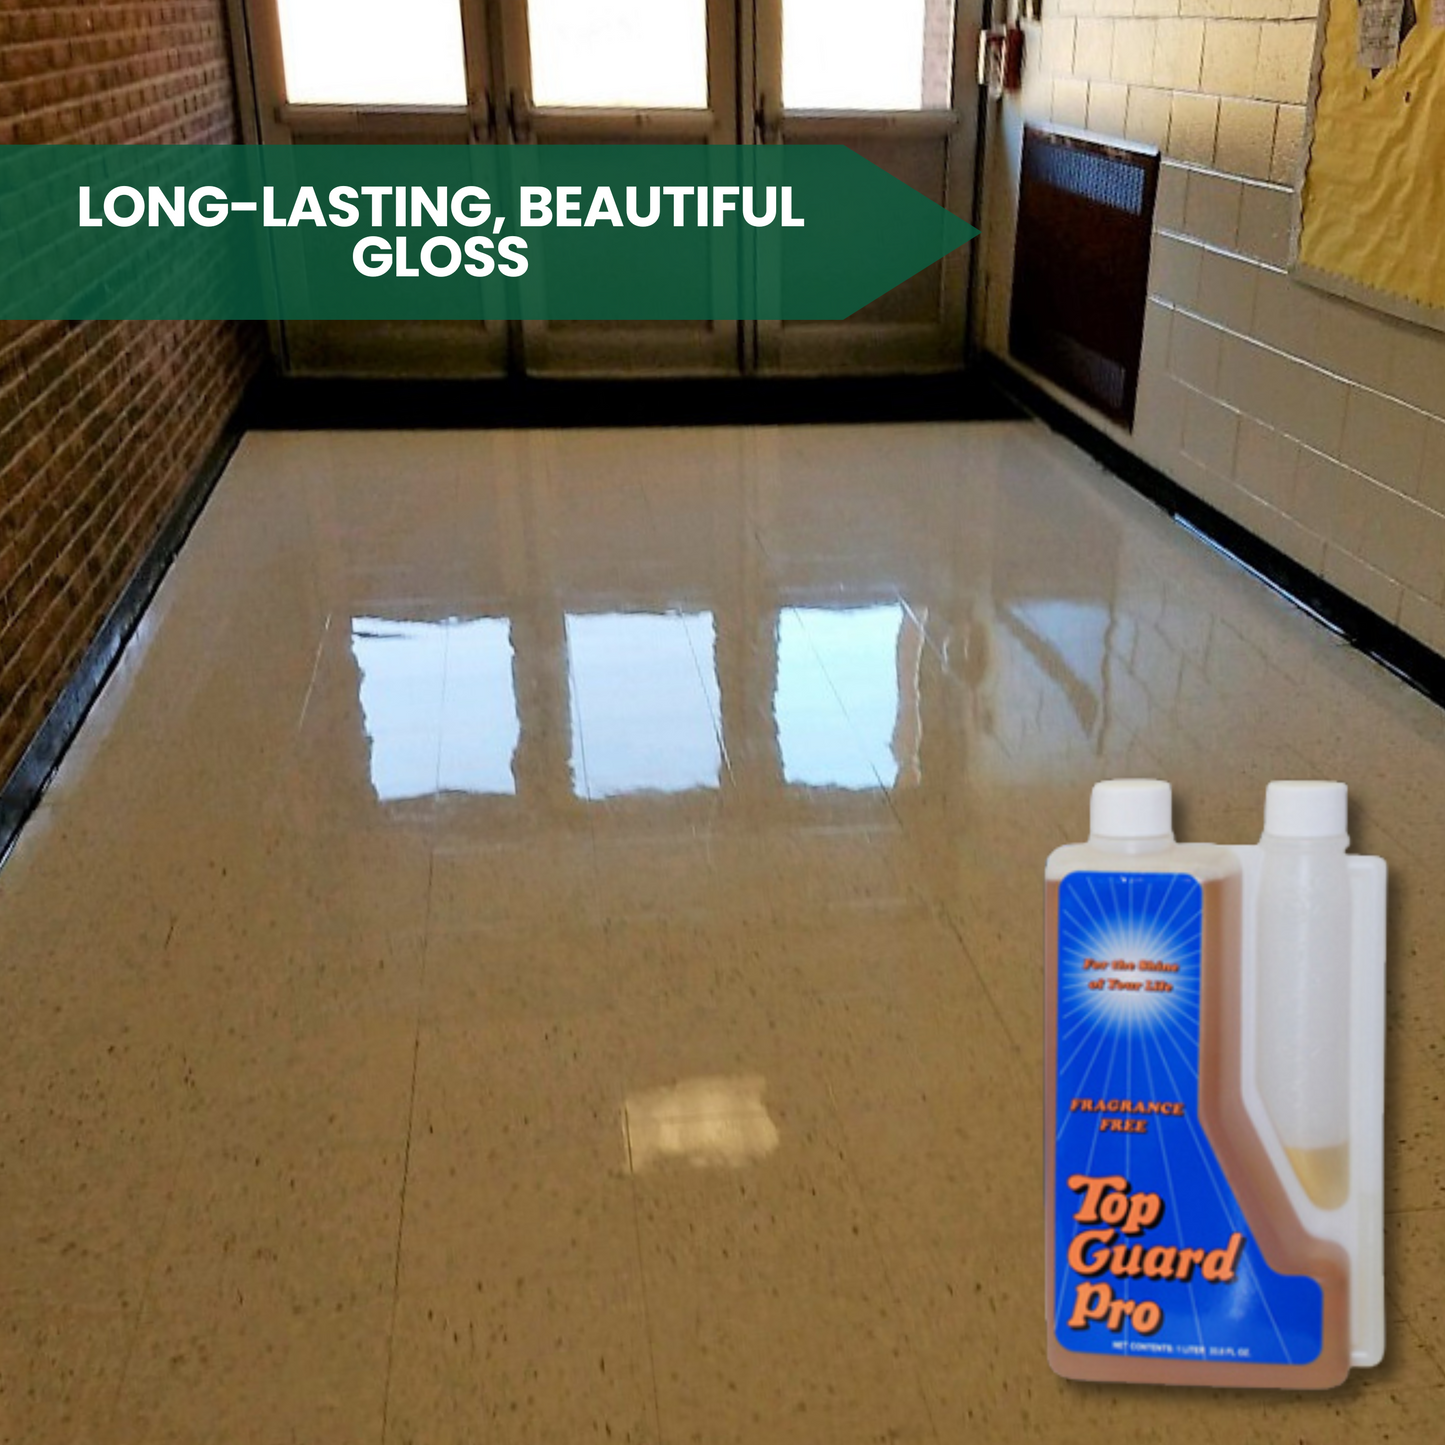 Top Guard PRO - Commercial & Industrial Flooring Protection, Surface Shield, Creating a Lustrous Wet Look Quick Shine Floor Finish (6x1 Litter Box)